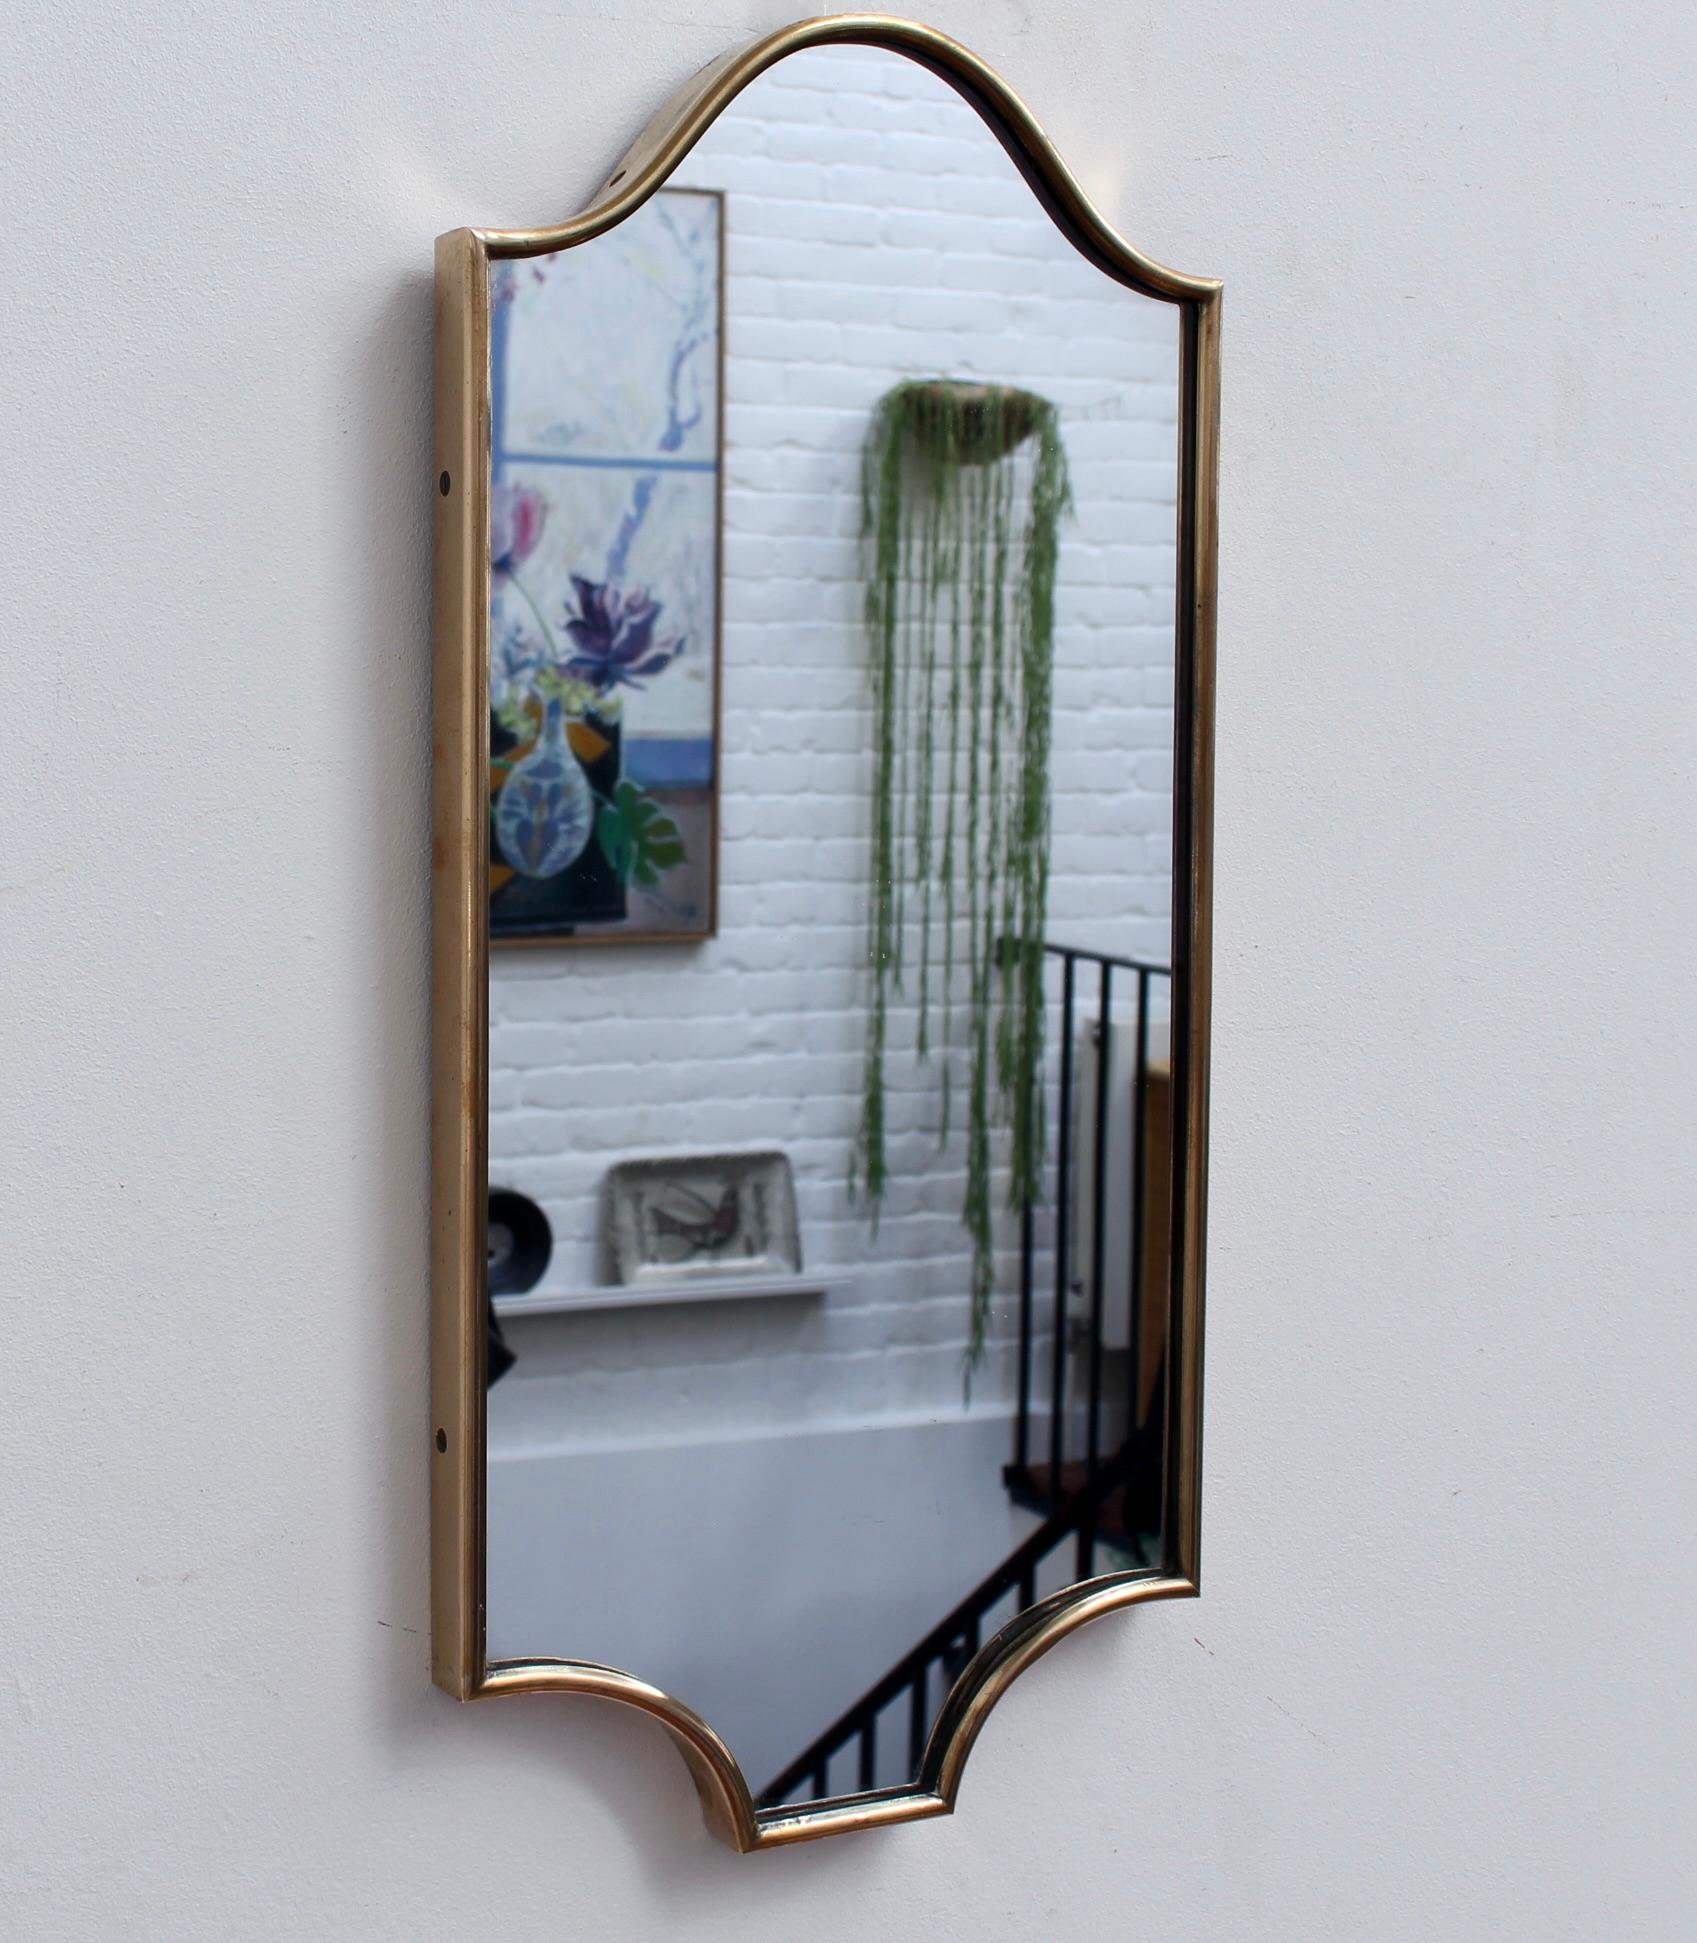 Small-scale midcentury Italian wall mirror with brass frame (circa 1950s). The mirror is rectangular-shaped with a sensuous curve on top and on the bottom, two curves connecting to a short horizontal. It is classically elegant and distinctive in a